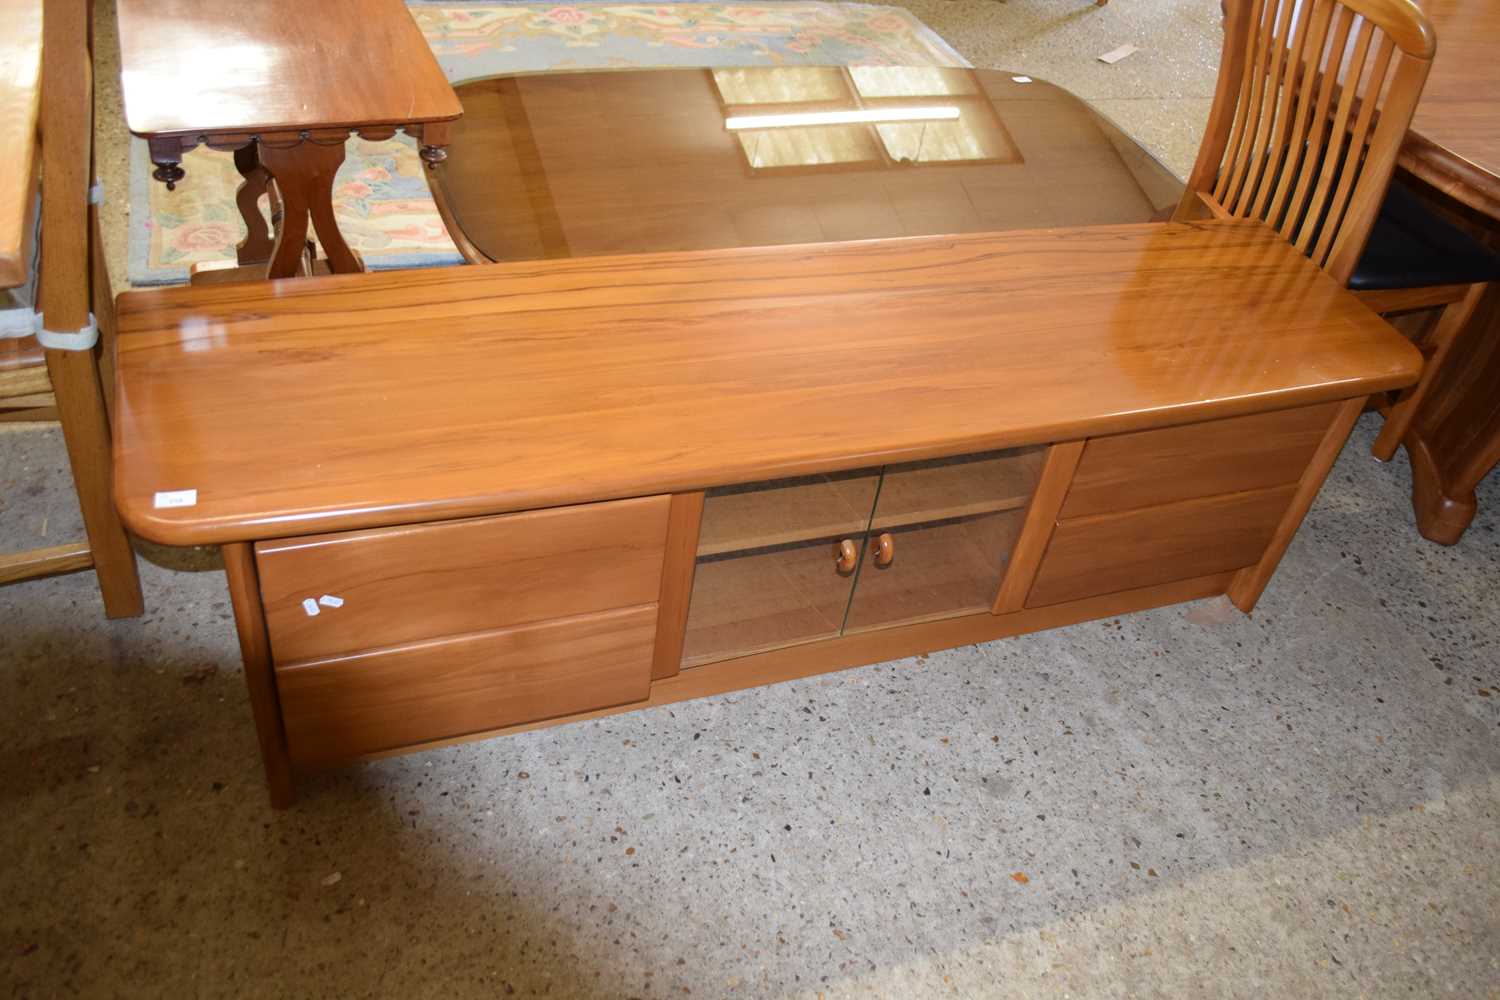 NEW ZEALAND RIMU WOOD TV CABINET WITH DRAWERS, 176CM WIDE